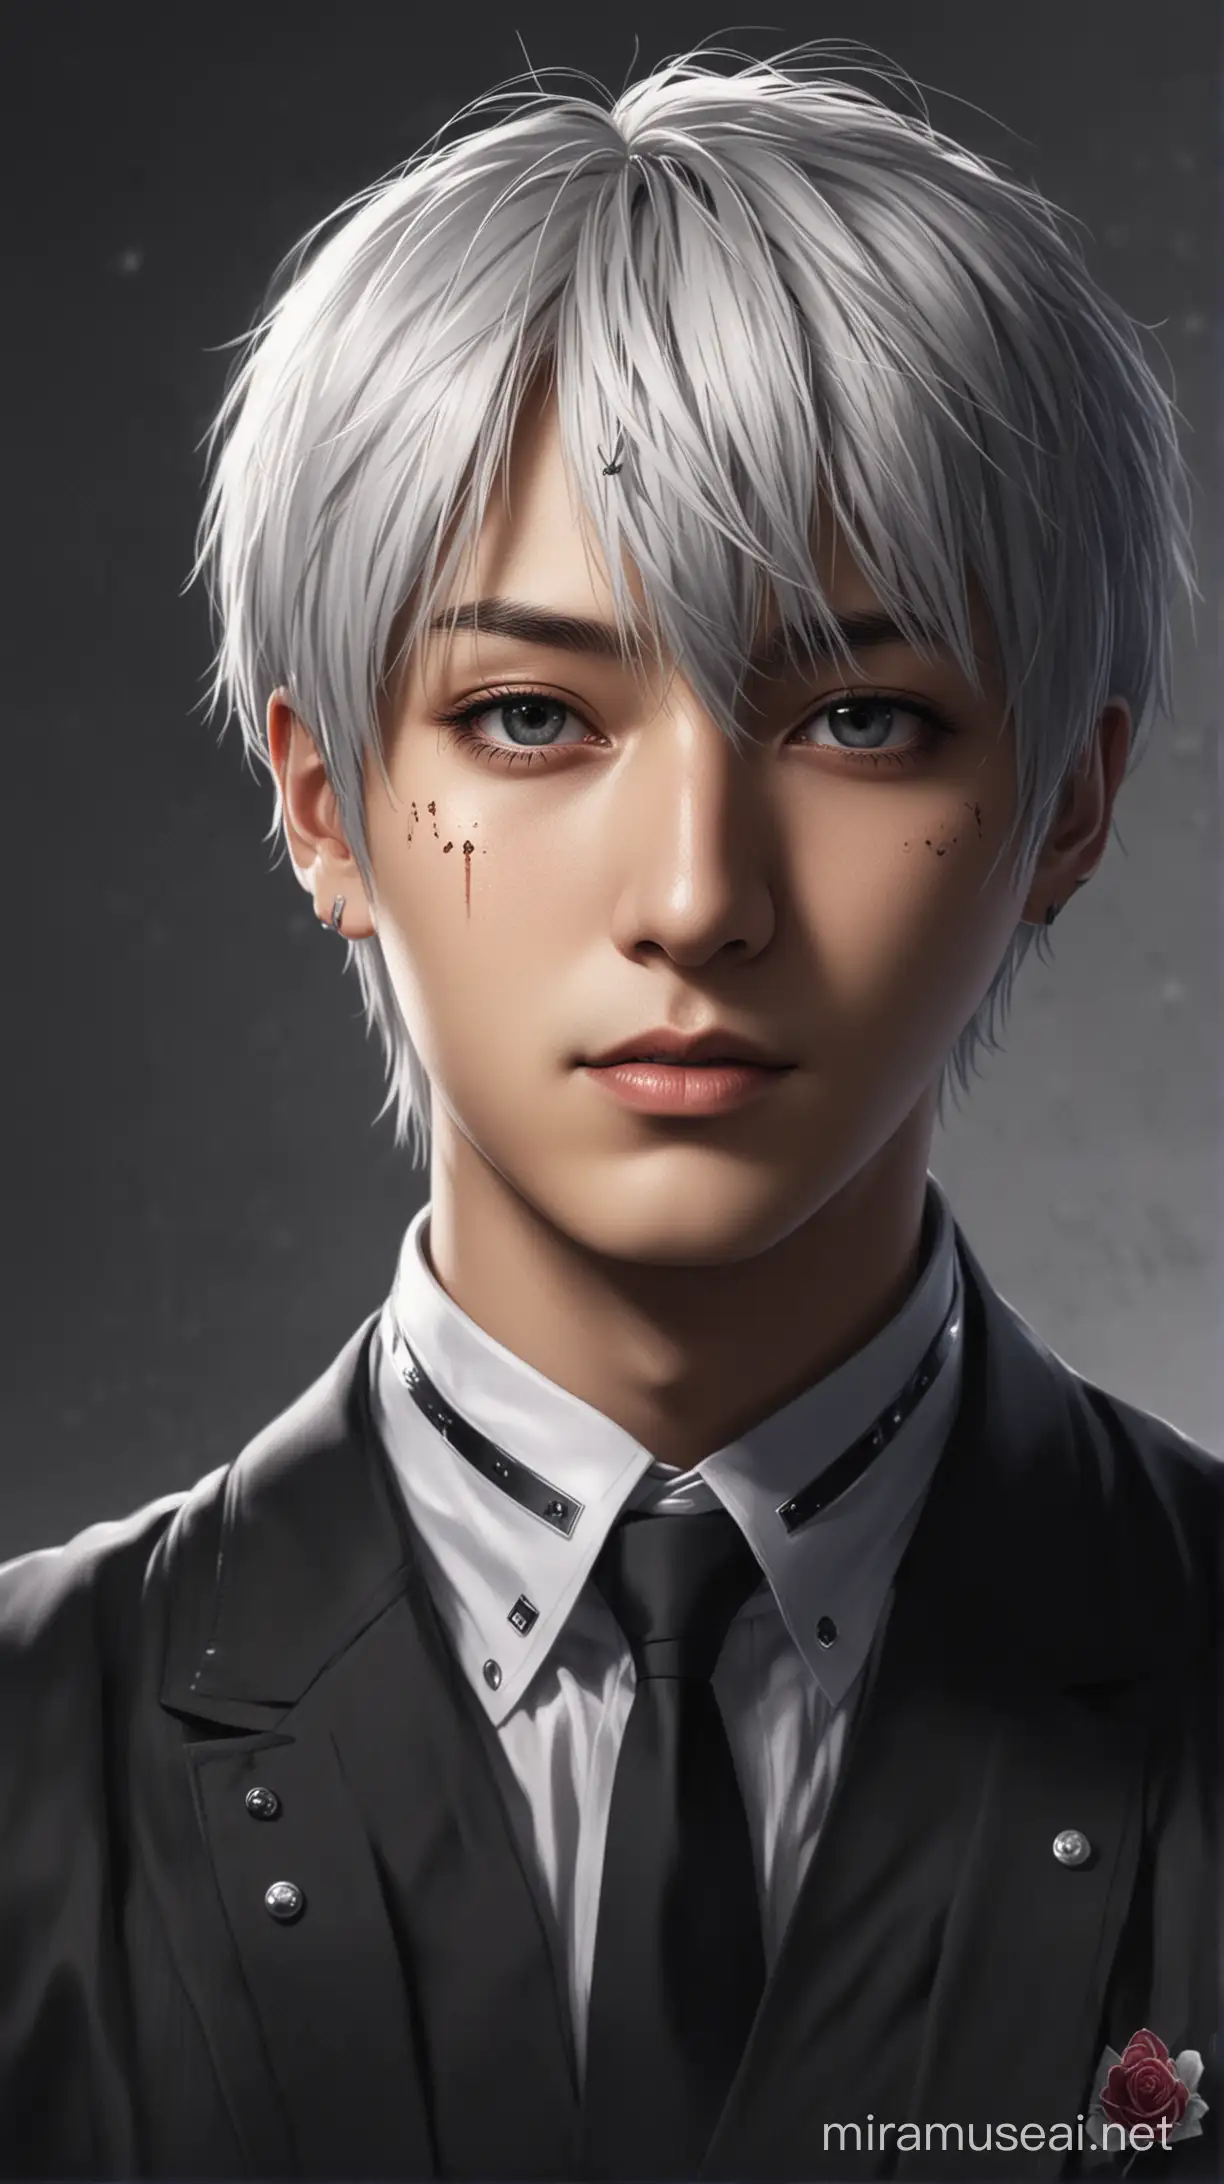 mixed jungkook from bts with ken kaneki from tokyo ghoul anime